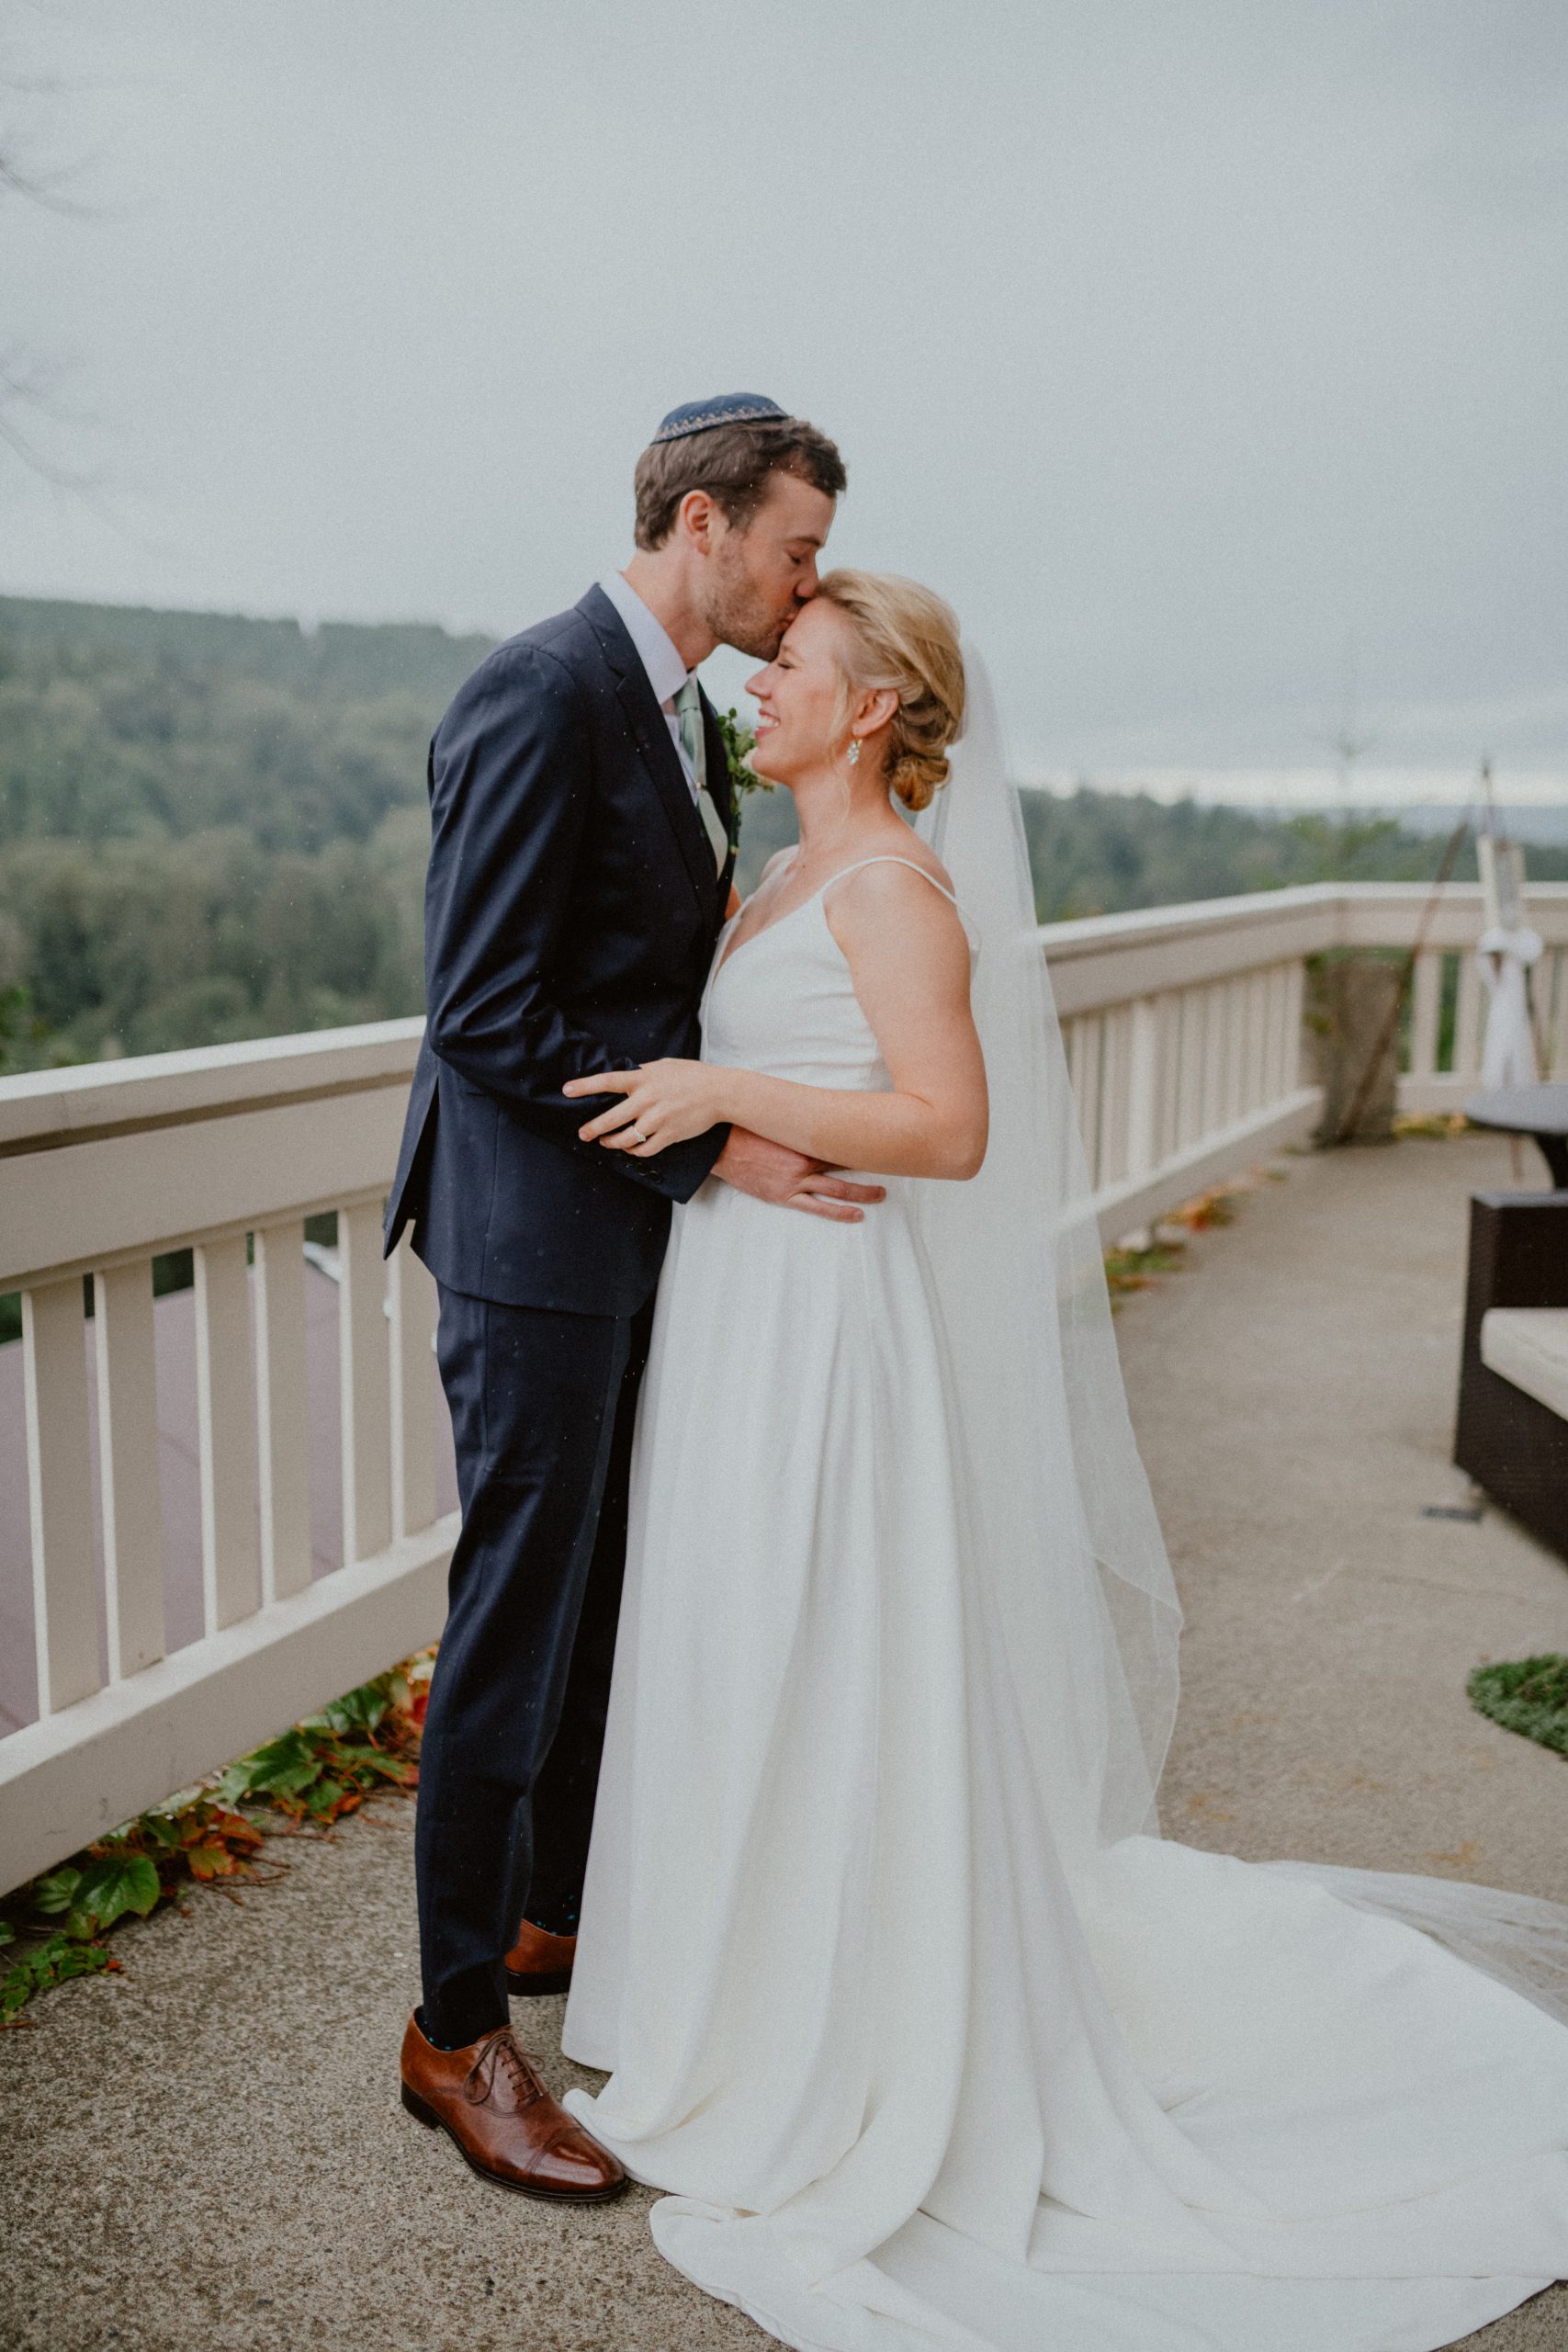 Groom kisses Bride on forehead in the rain after outdoor elopement wedding in Washington State, PNW wedding inspiration | Washington State Elopement Photographer, Seattle Elopement Photographer, Newlywed Elopement Photographer, Quarantine Wedding Elopement Inspiration | chelseaabril.com